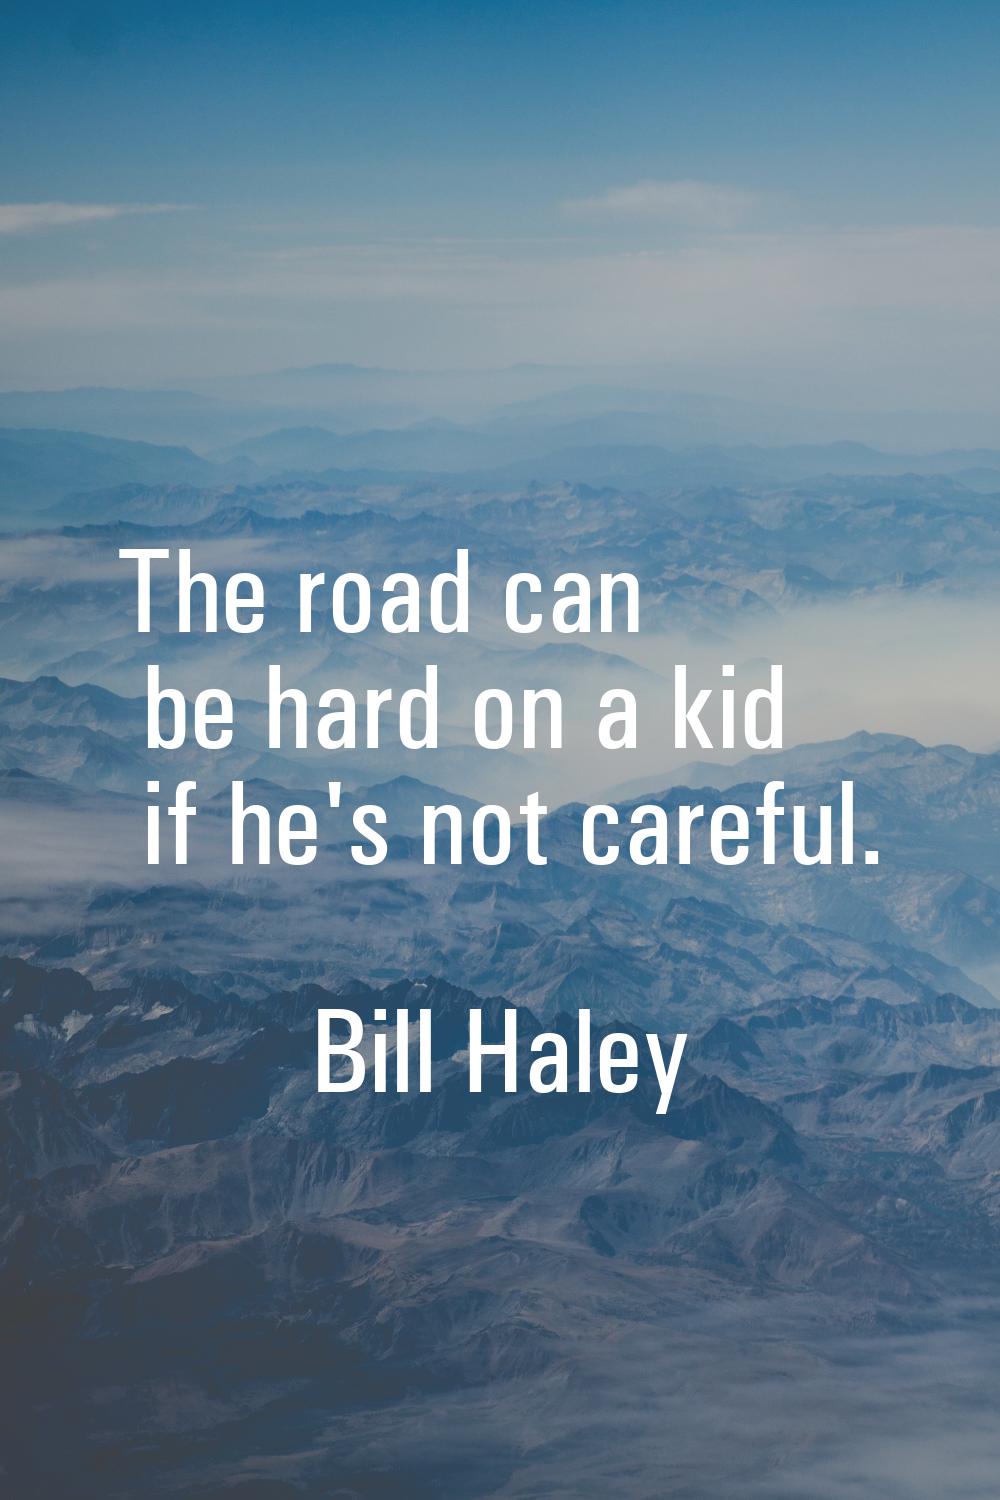 The road can be hard on a kid if he's not careful.